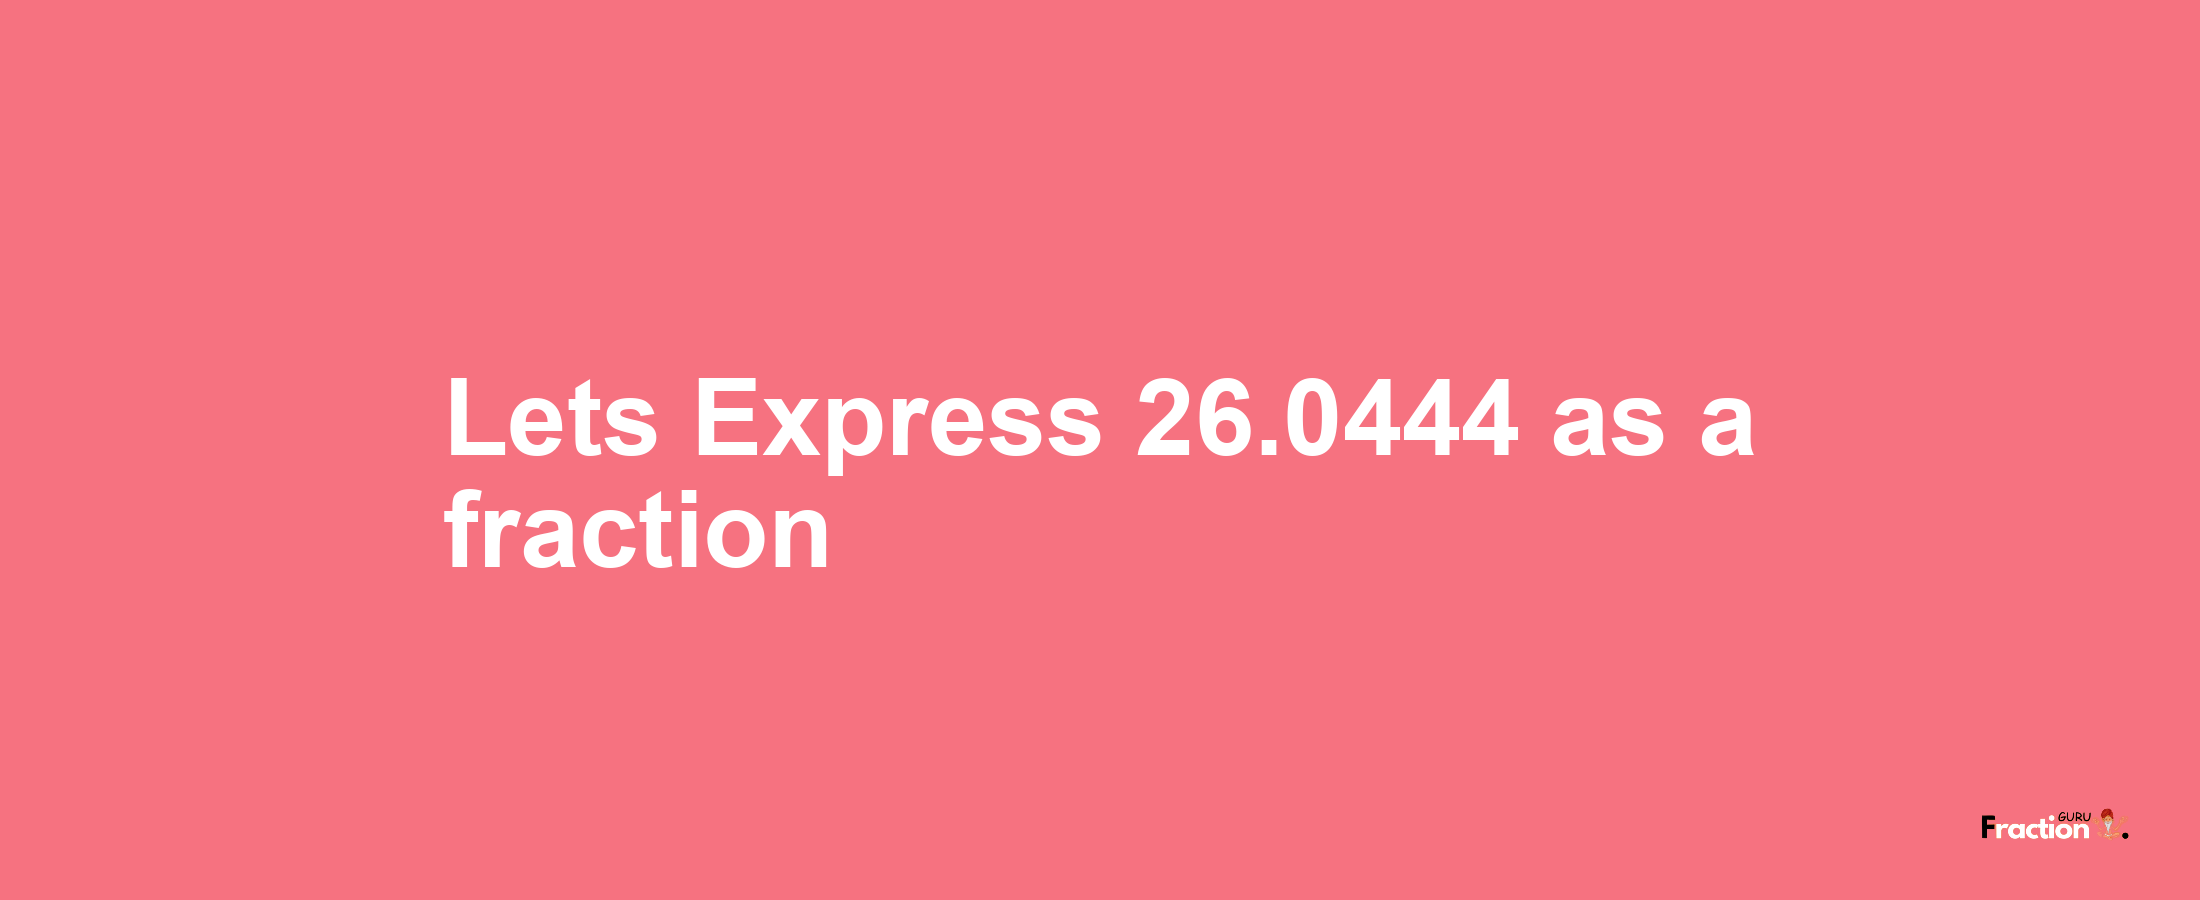 Lets Express 26.0444 as afraction